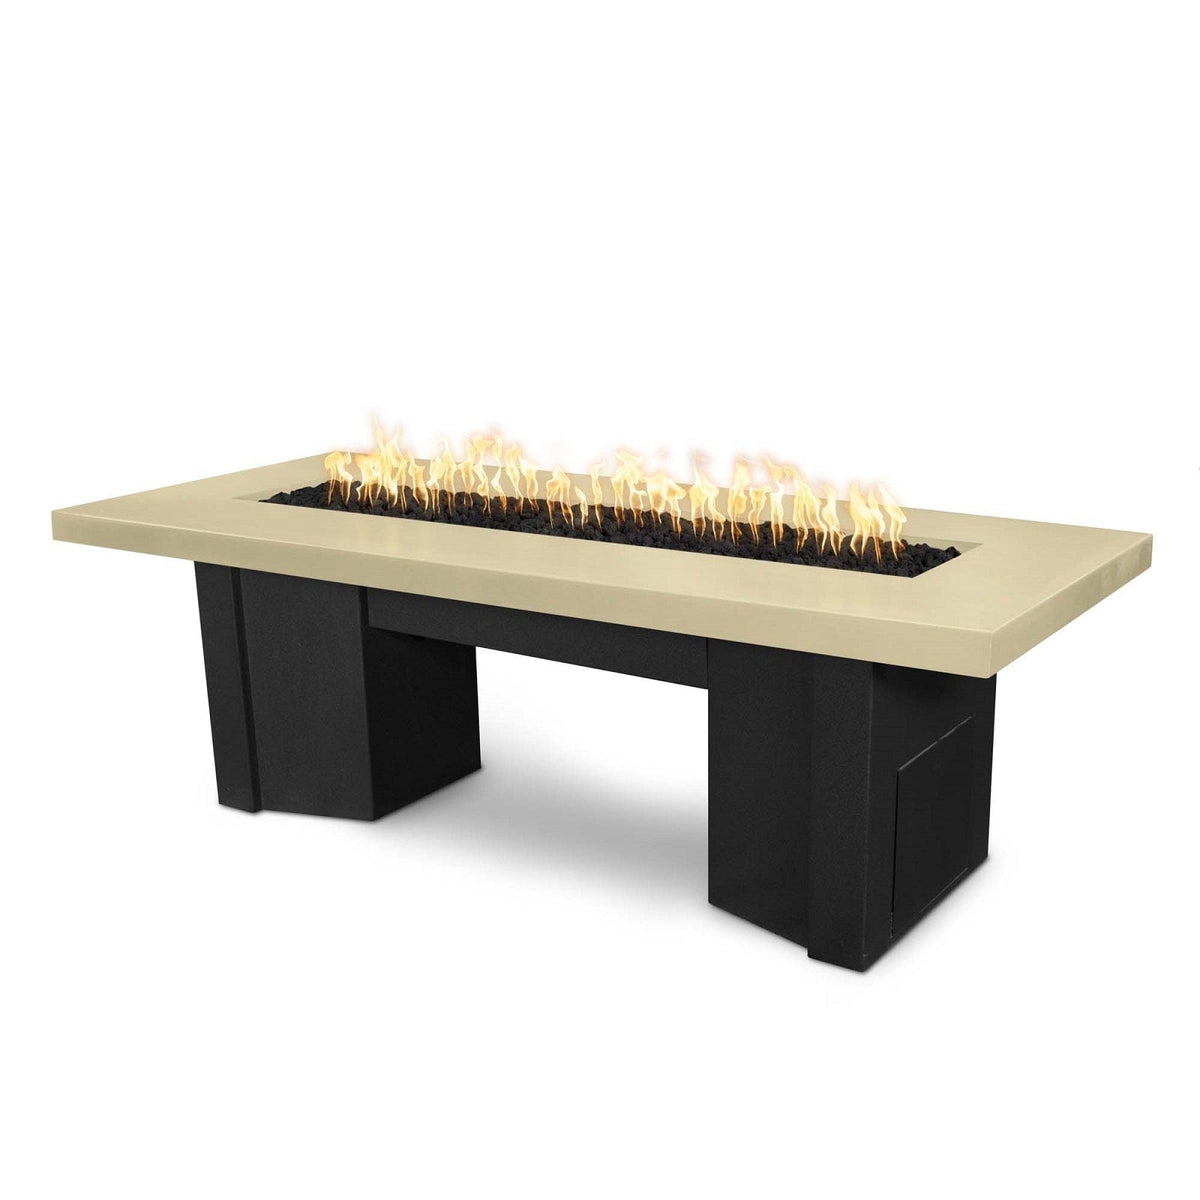 The Outdoor Plus Fire Features Vanilla (-VAN) / Black Powder Coated Steel (-BLK) The Outdoor Plus 78&quot; Alameda Fire Table Smooth Concrete in Liquid Propane - Flame Sense System with Push Button Spark Igniter / OPT-ALMGFRC78FSEN-LP